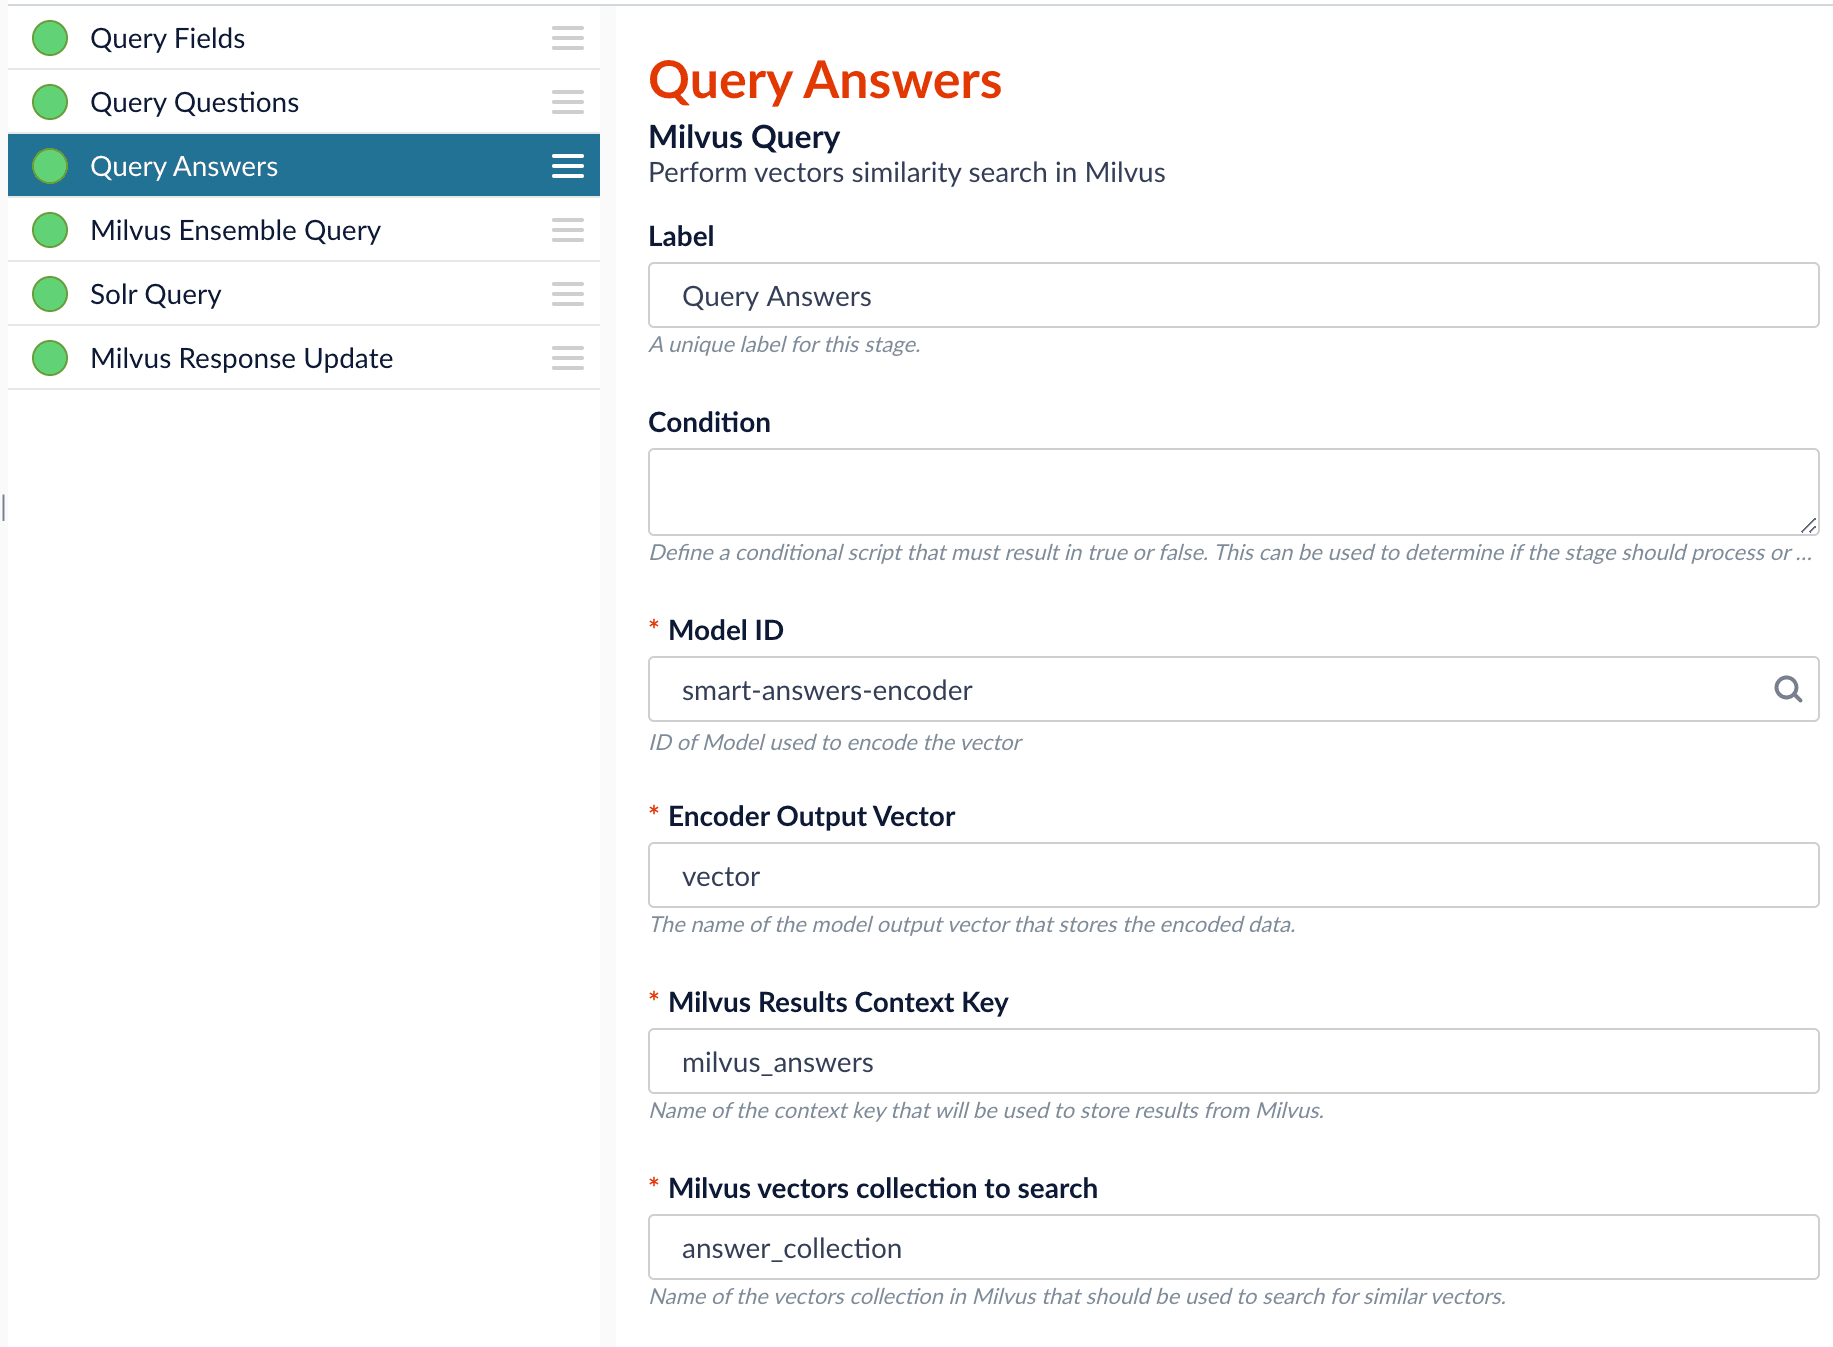 Pipeline setup example - Query Answers stage